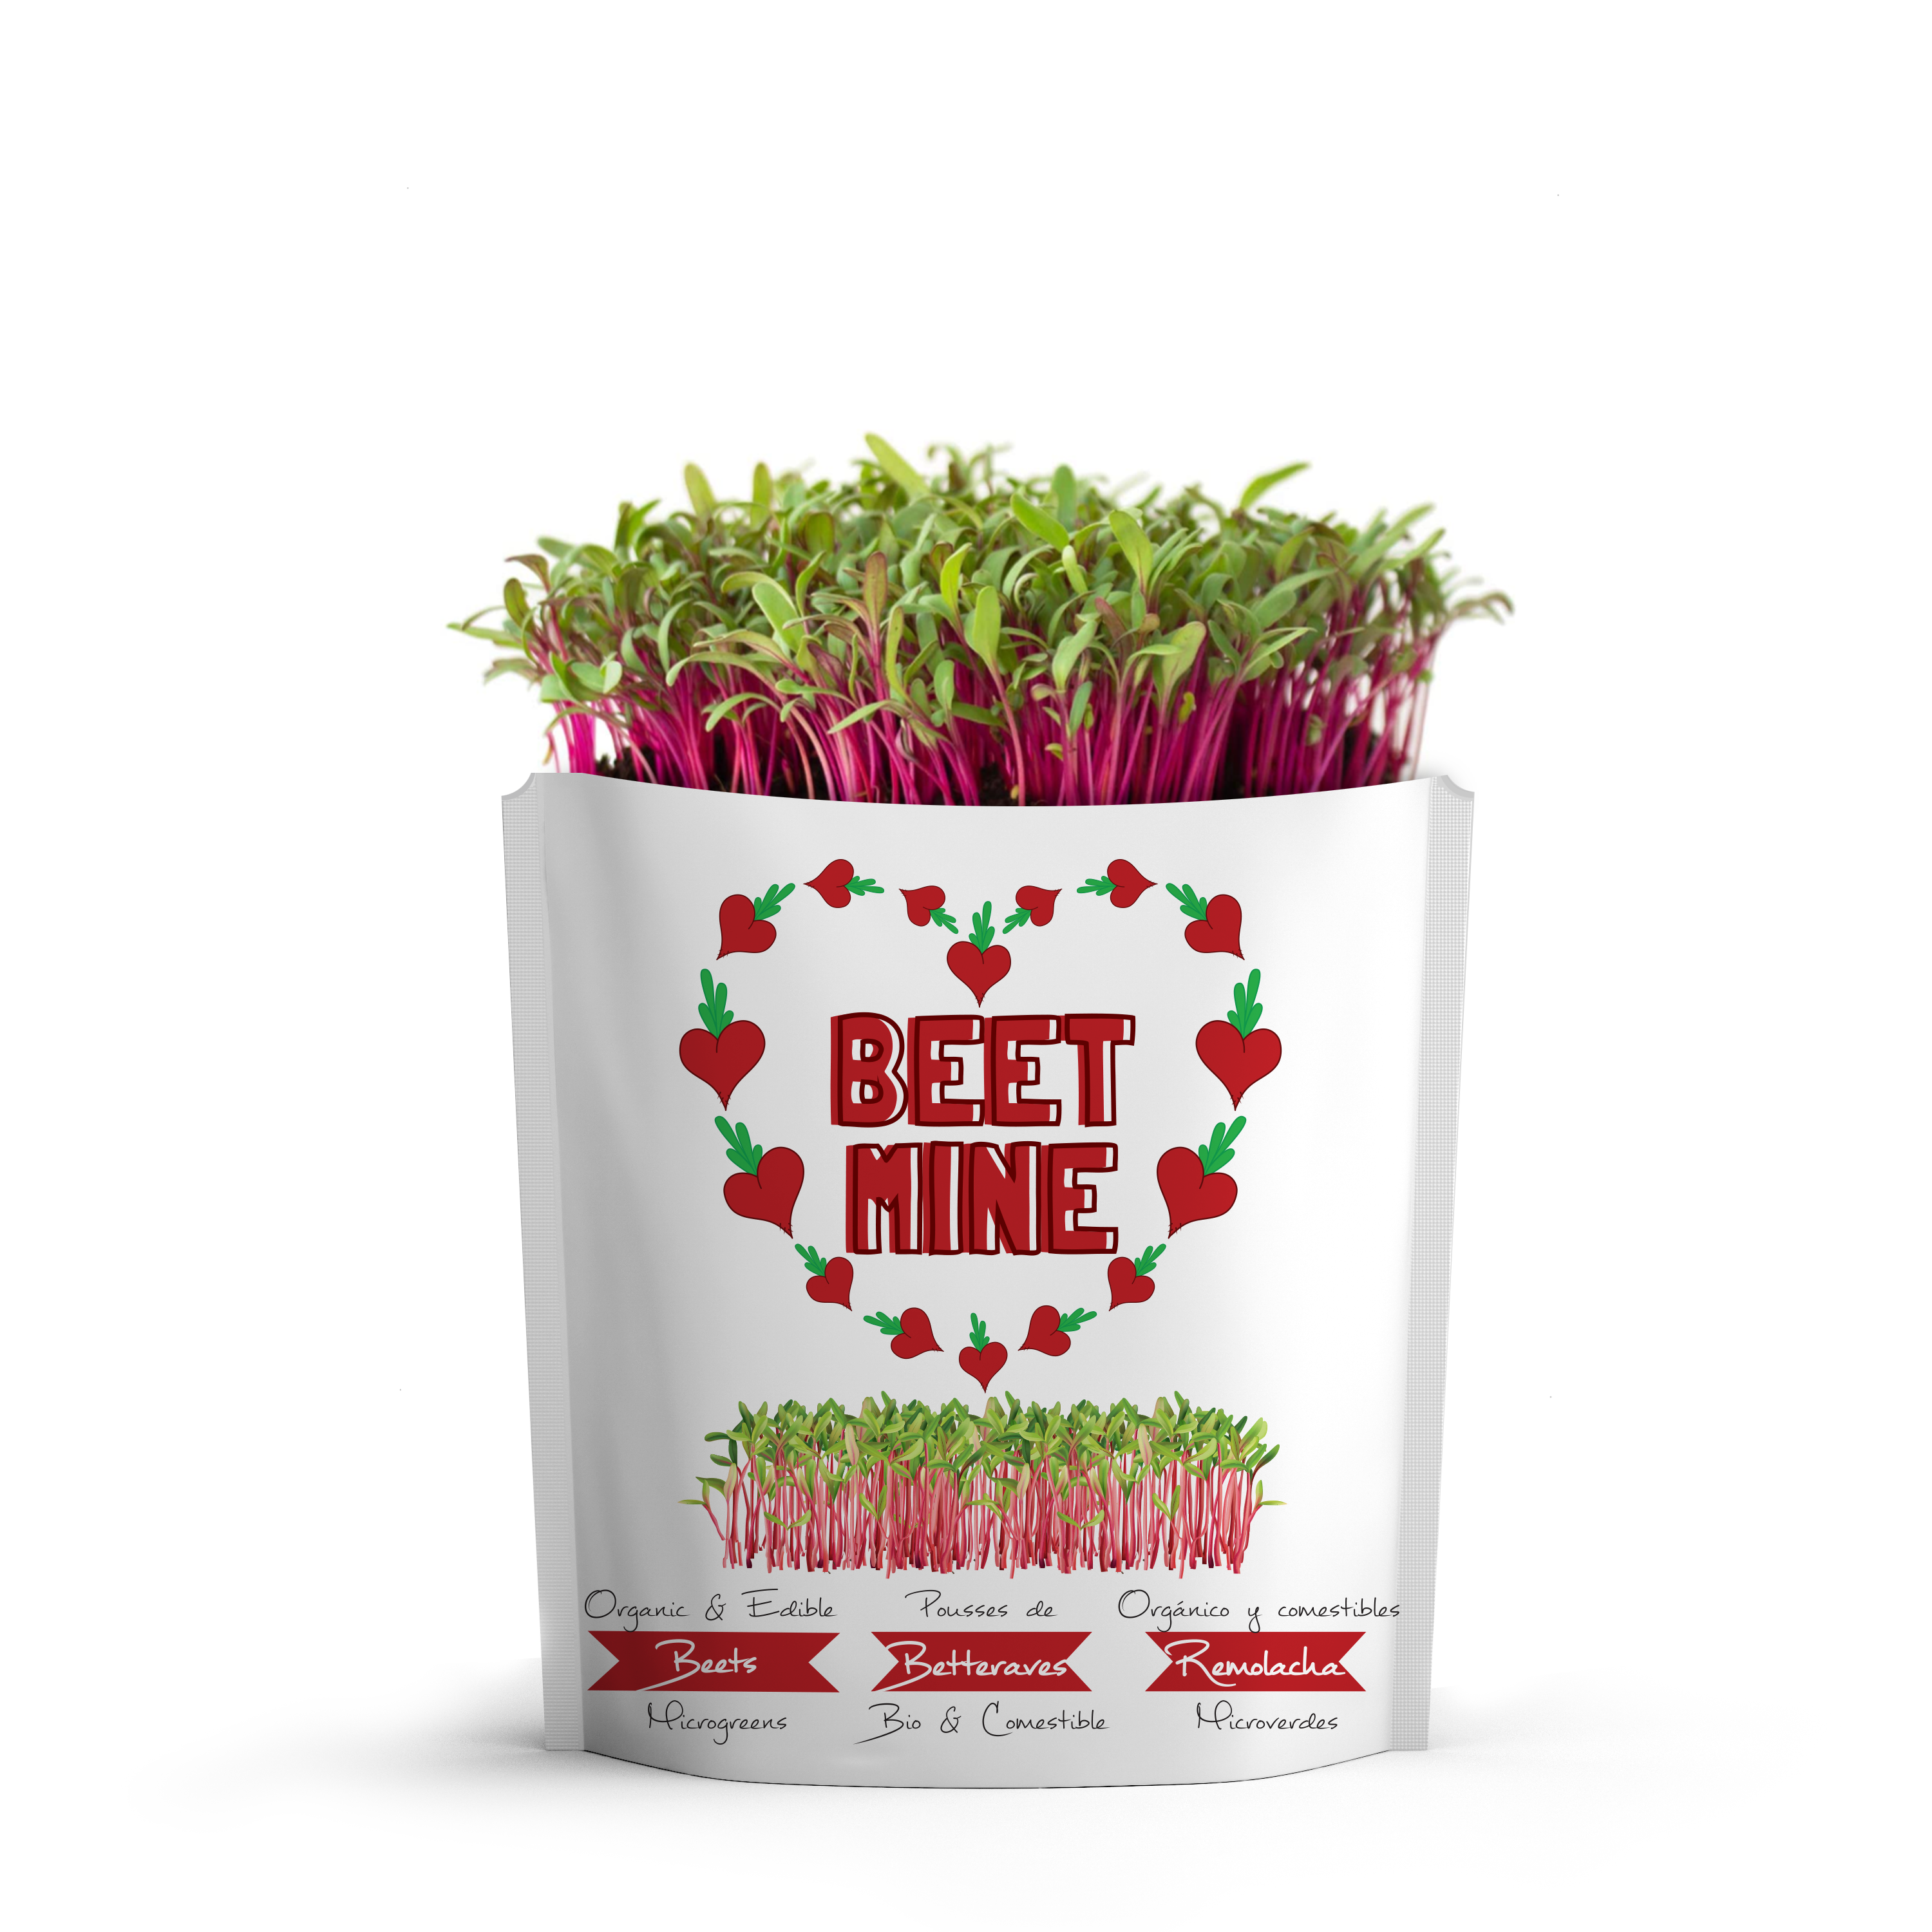 Beet Mine Greeting Card Pouch